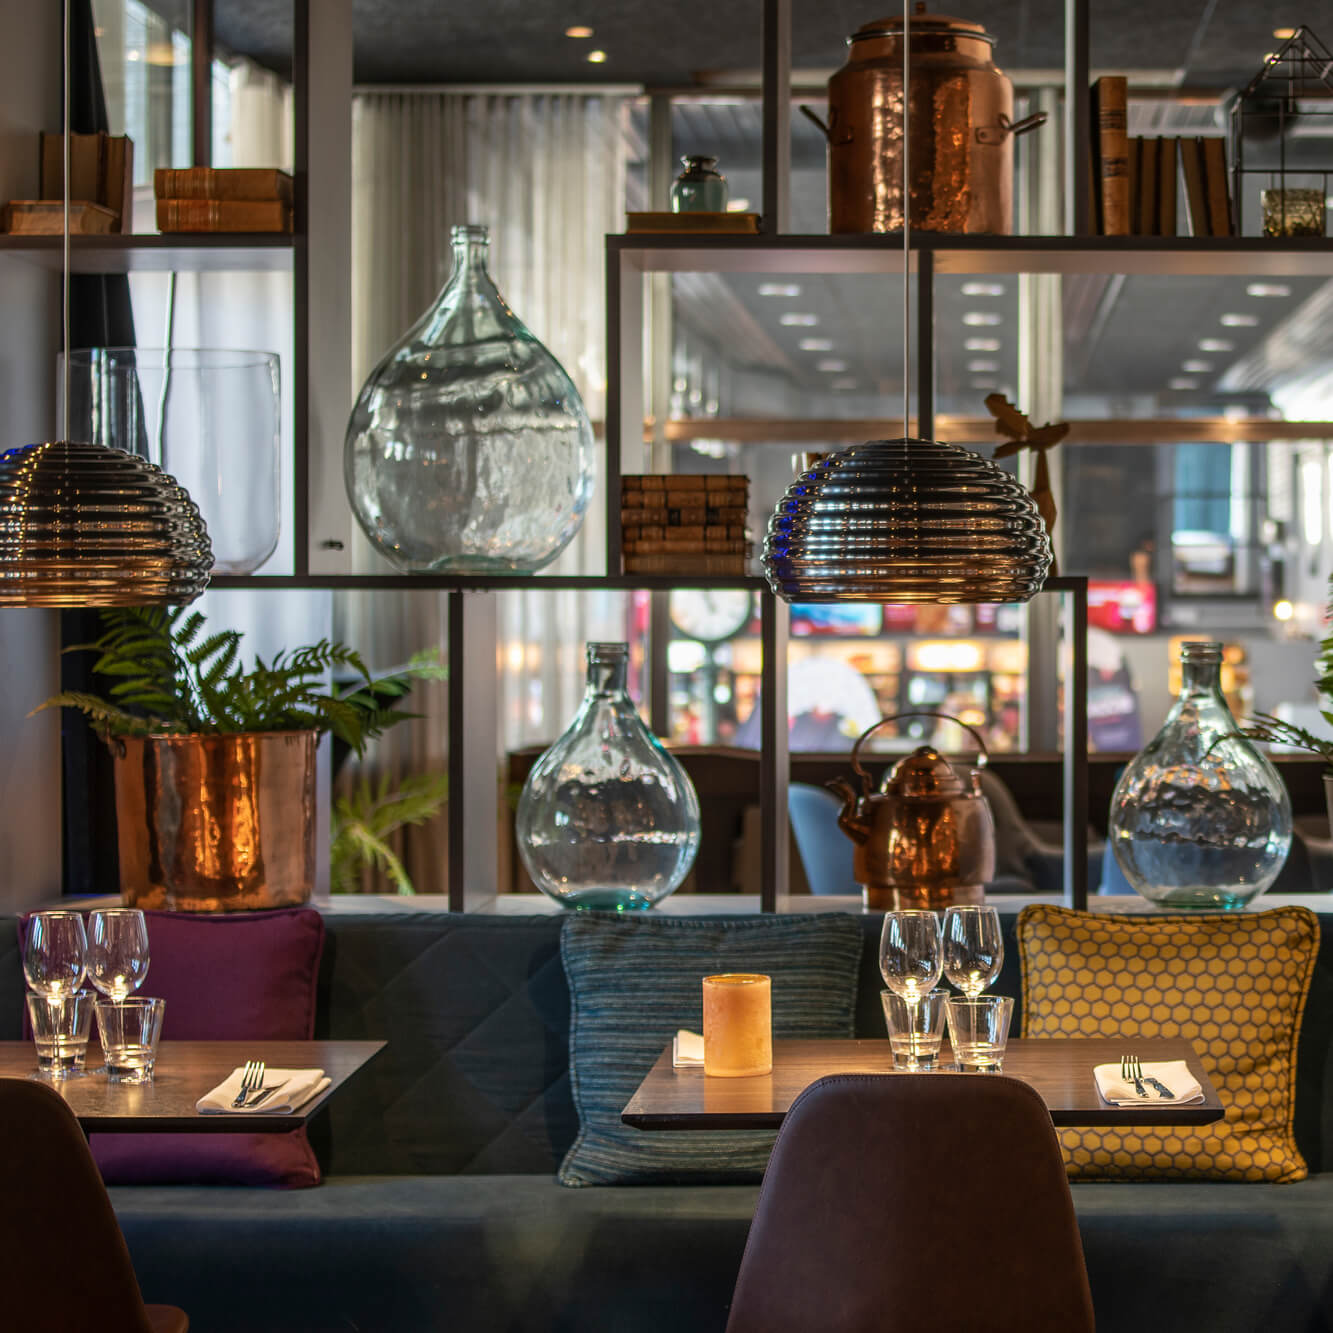 Interior details of Q.Bar at Quality Hotel Sundsvall.